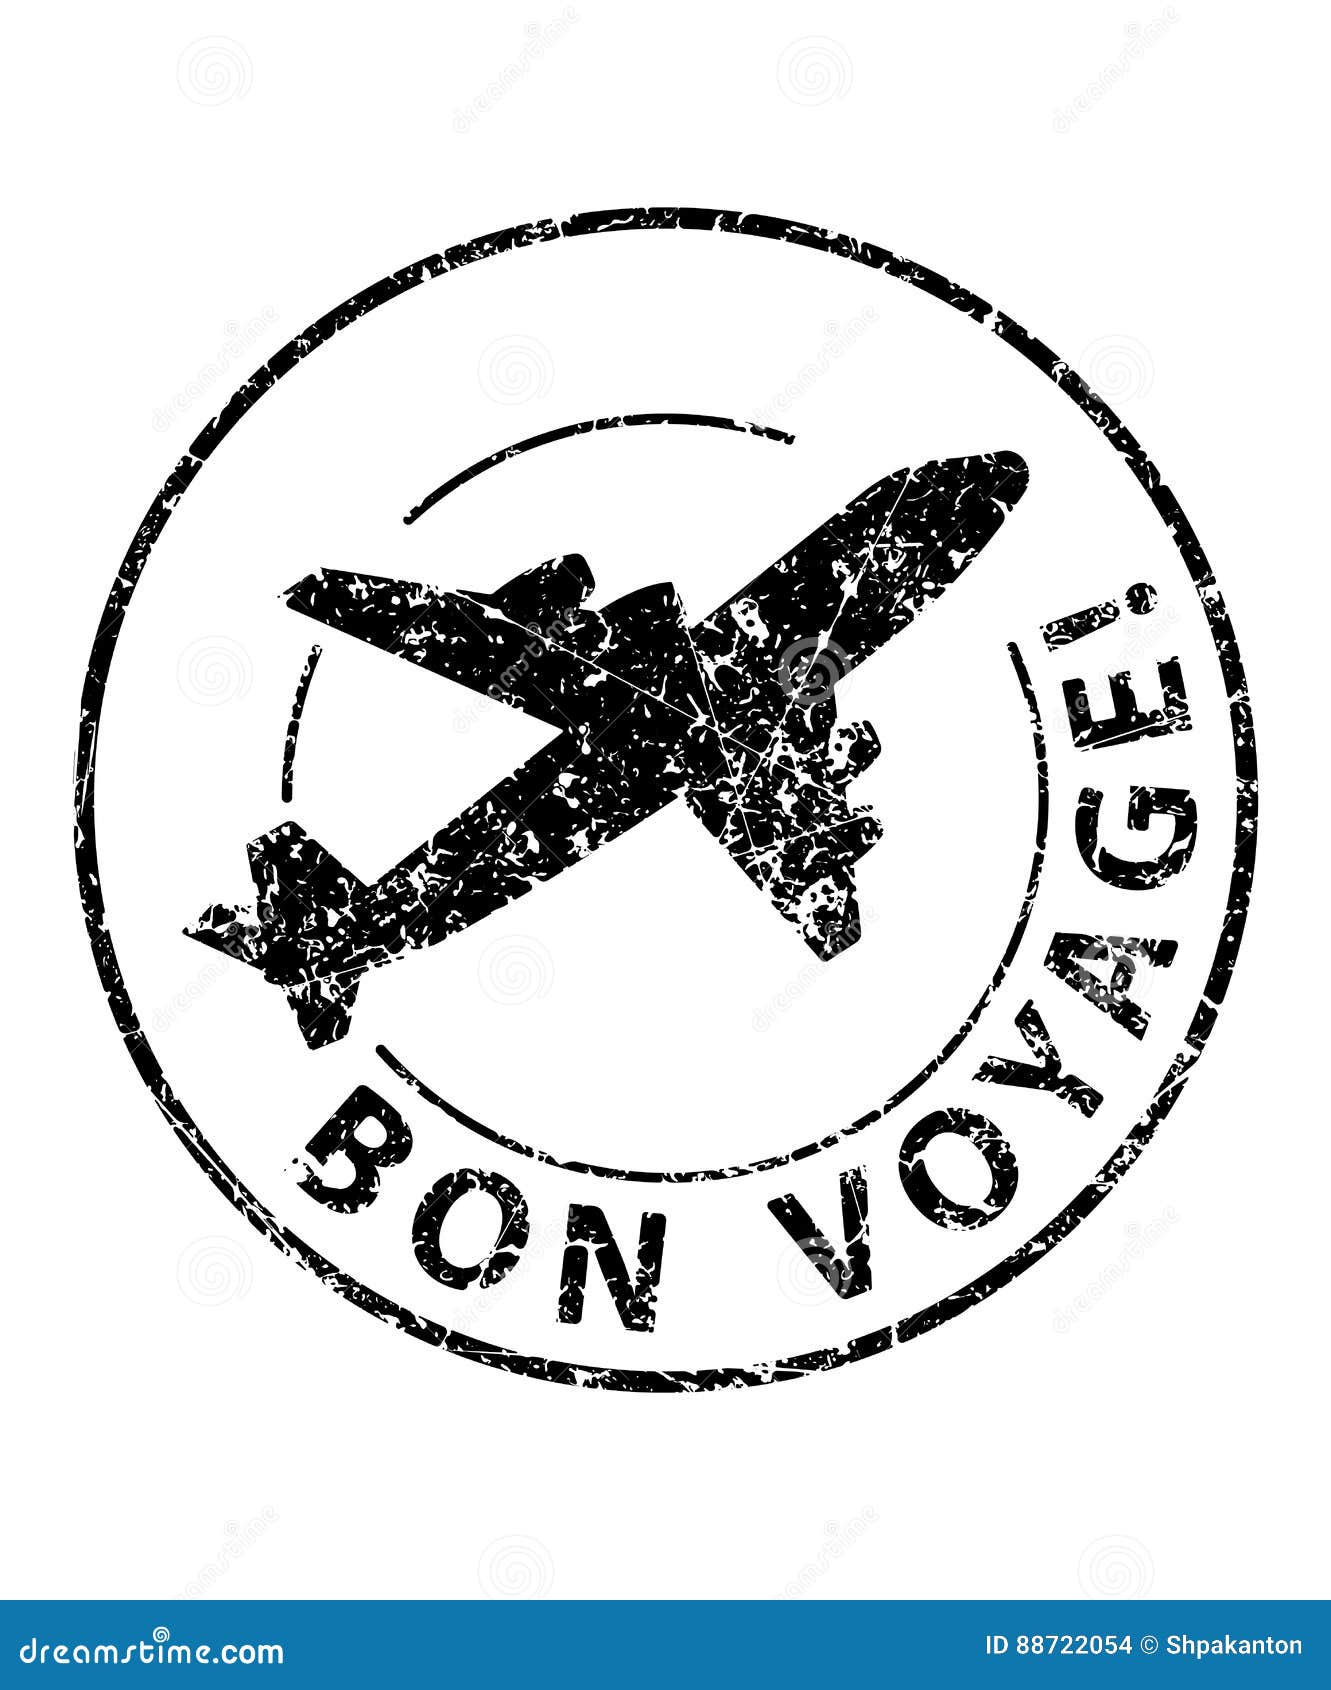 bon voyage black rubber stamp with silhouette of airplane